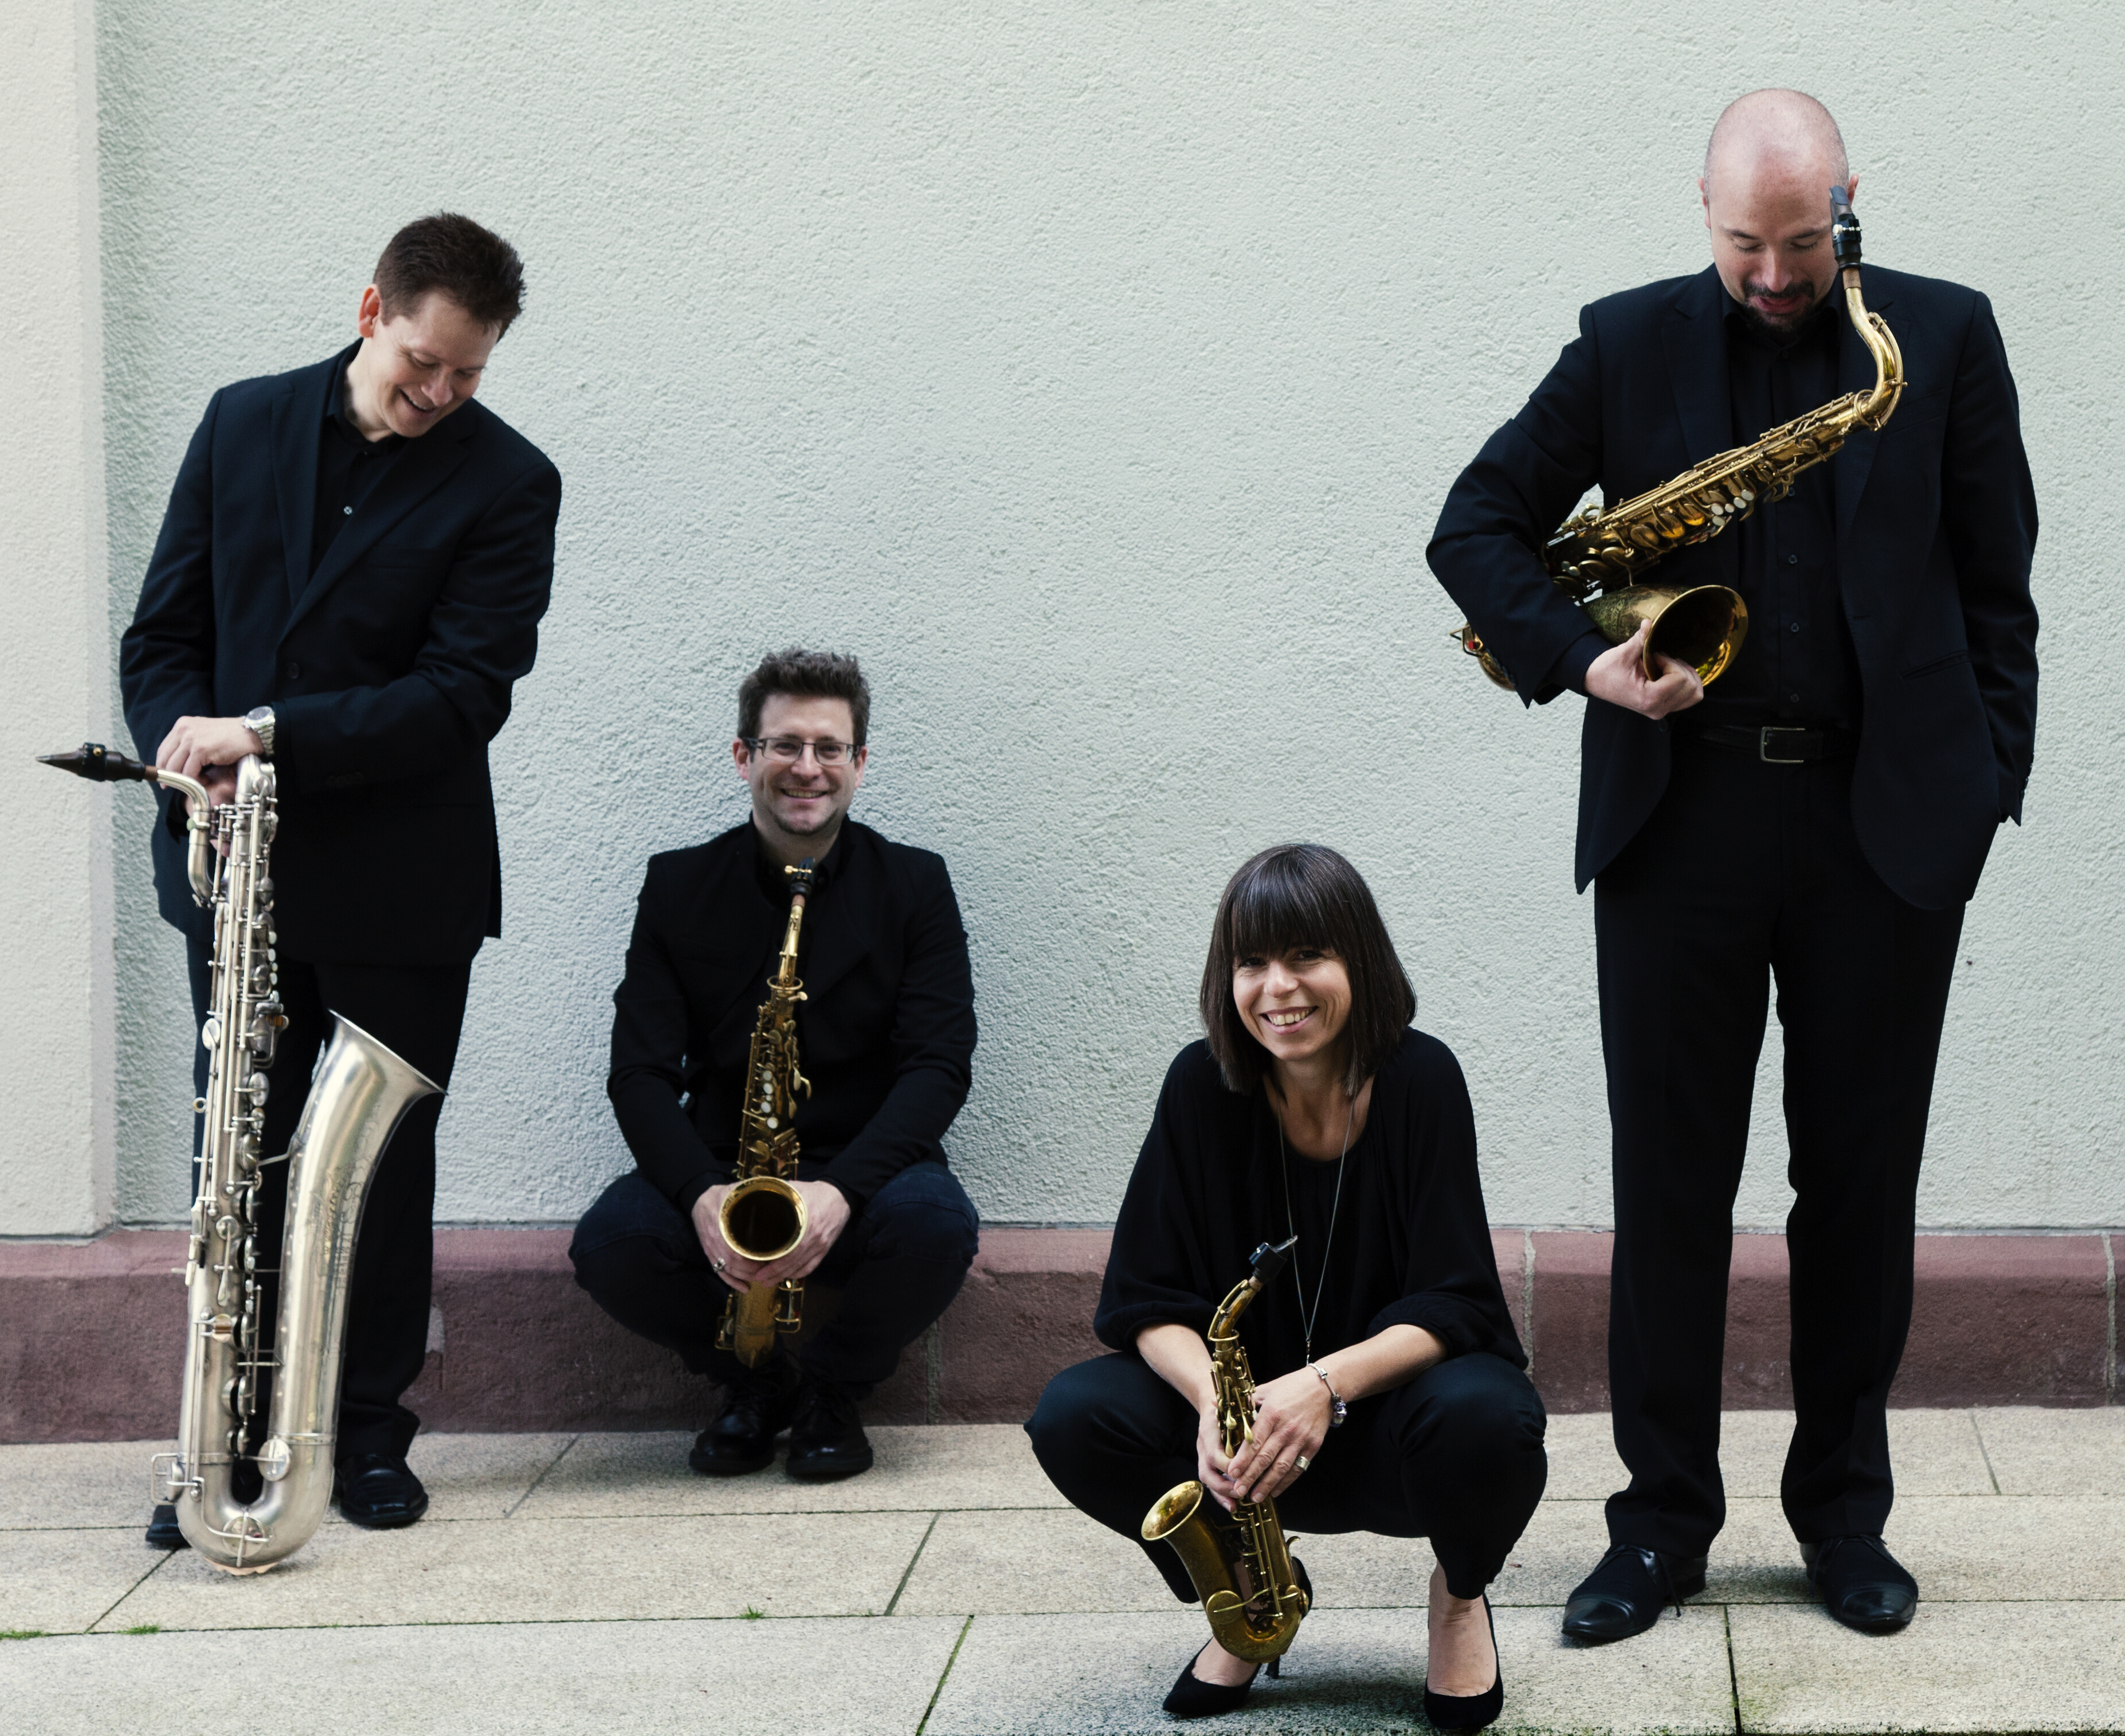 The Rascher Quartet holding their instruments which include a curved soprano saxophone.